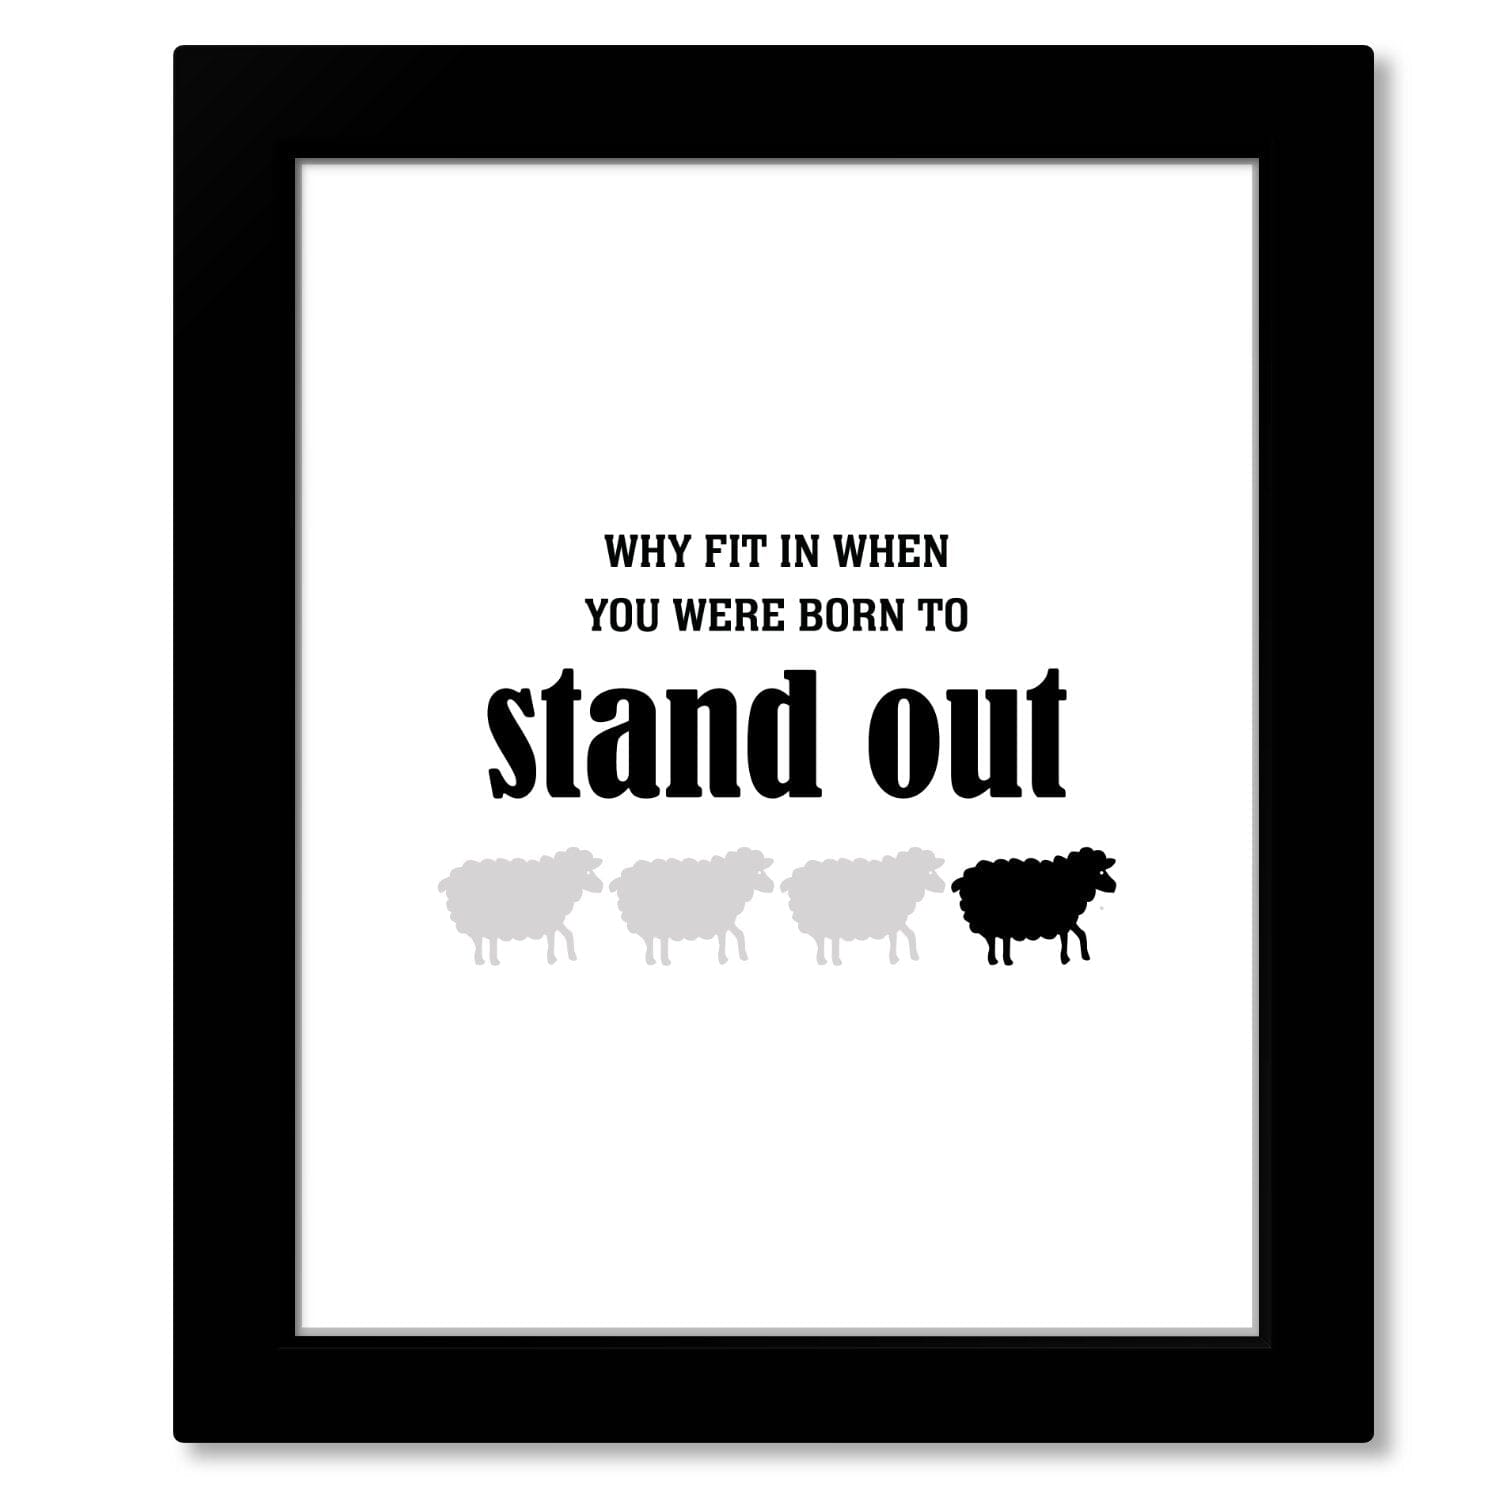 Why Fit in When You Were Born to Stand Out - Wise and Witty Print Wise and Wiseass Quotes Song Lyrics Art 8x10 Framed Print 